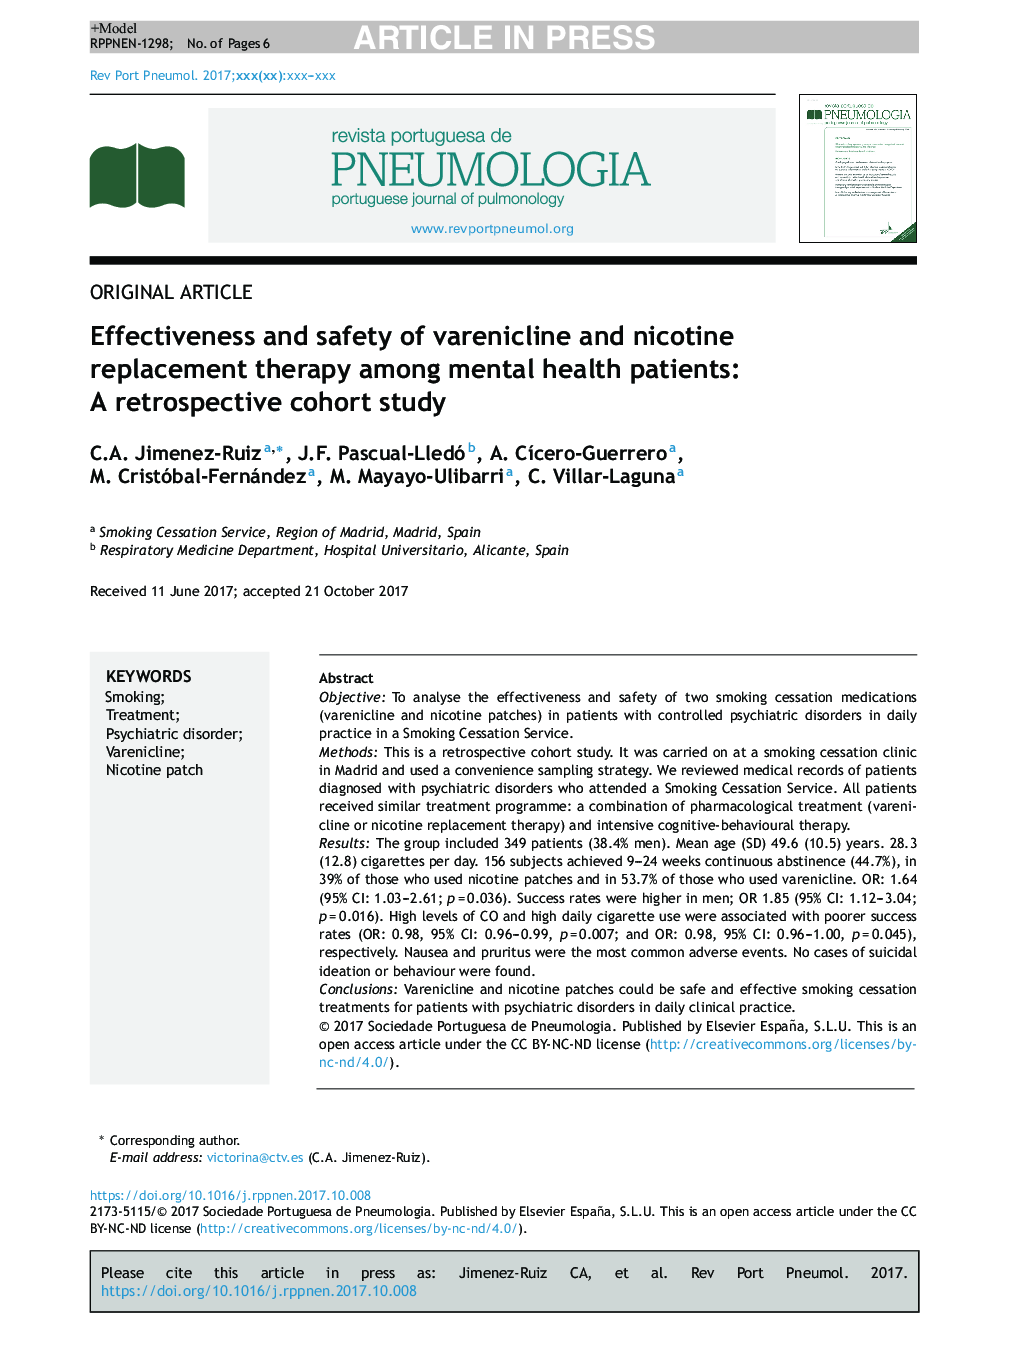 Effectiveness and safety of varenicline and nicotine replacement therapy among mental health patients: A retrospective cohort study